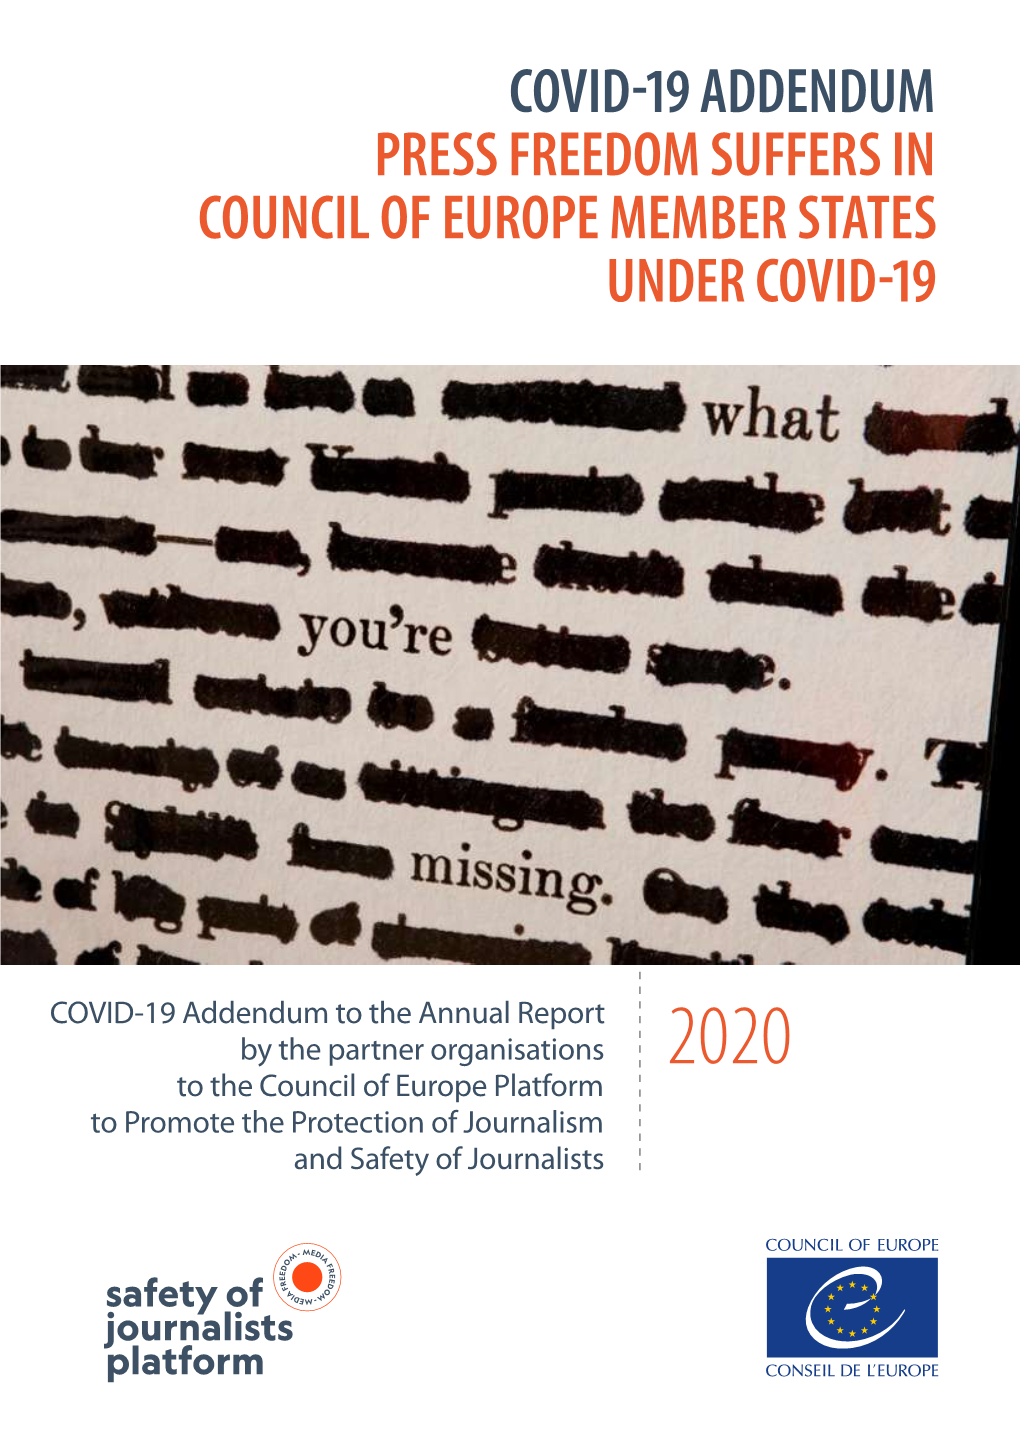 Covid-19 Addendum Press Freedom Suffers in Council of Europe Member States Under Covid-19